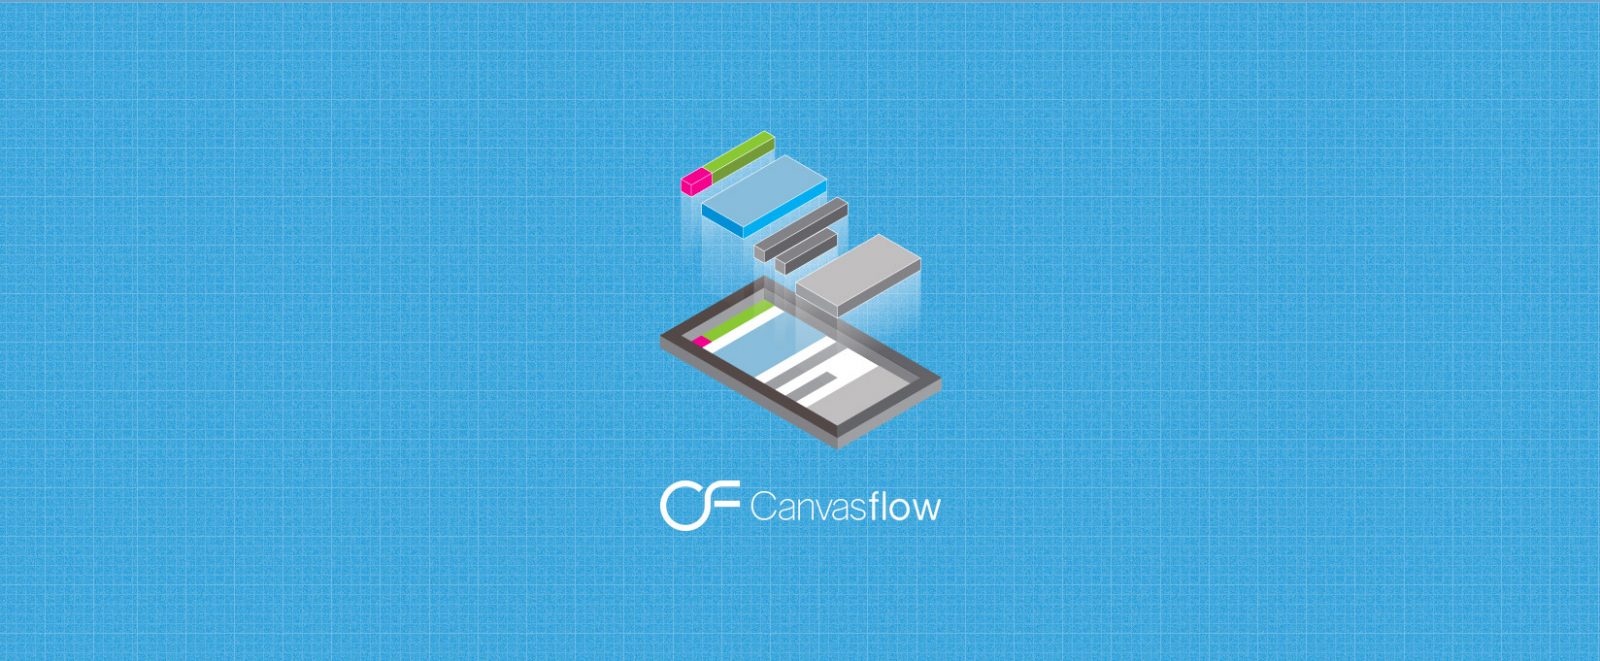 Twixl Publisher 5 Introducing Canvasflow for HTML authoring